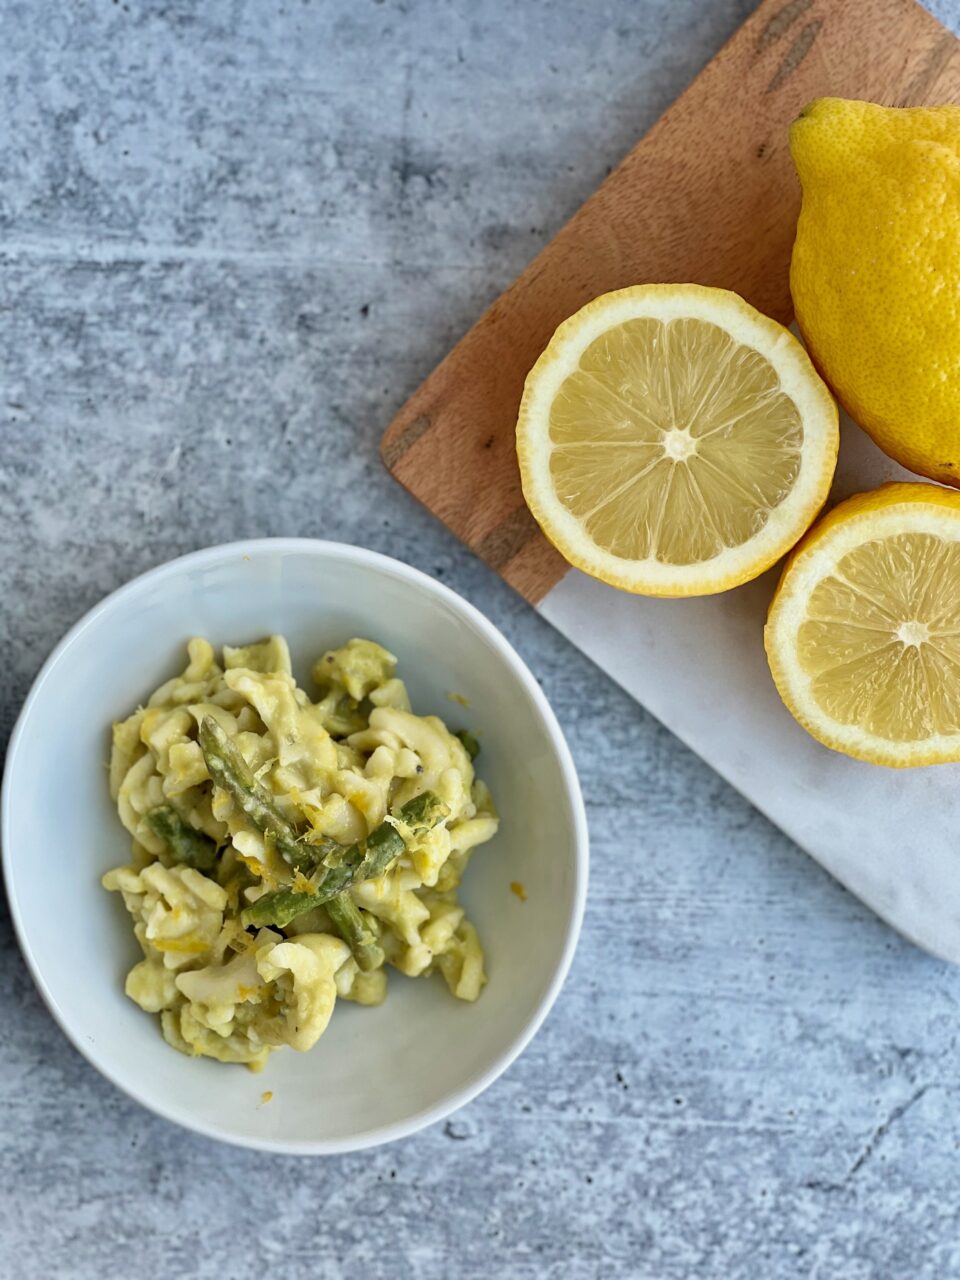 Picture of a bowl of pasta with asparagus and lemons